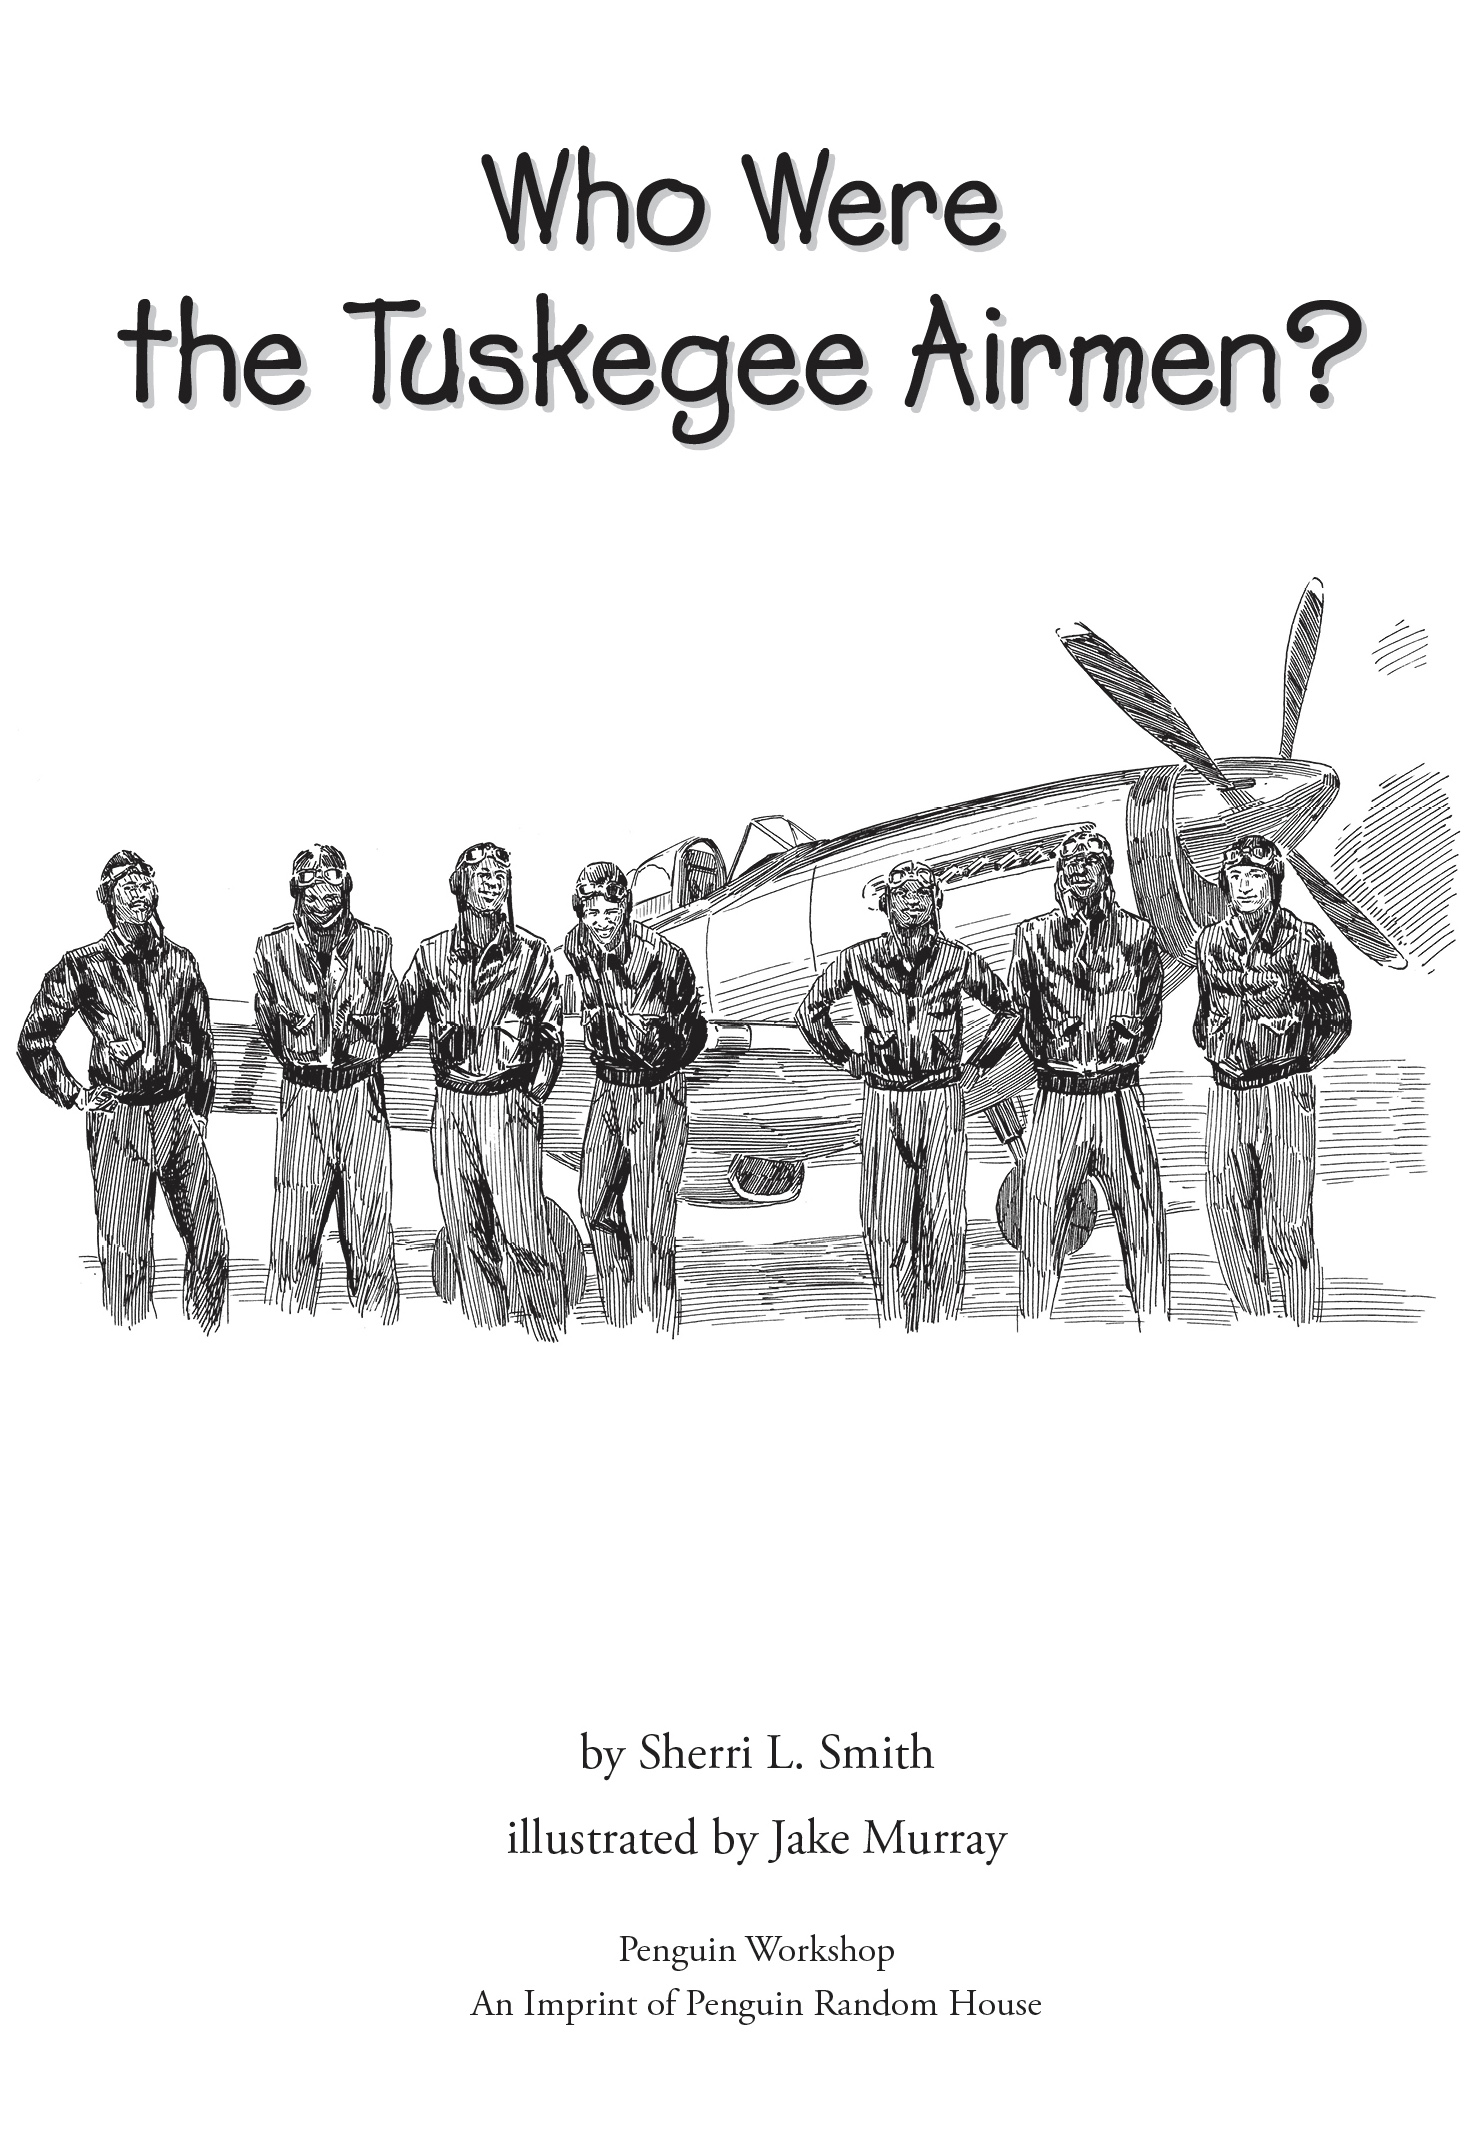 In honor of the Tuskegee Airmen on land and in the air to my brother Derek - photo 2